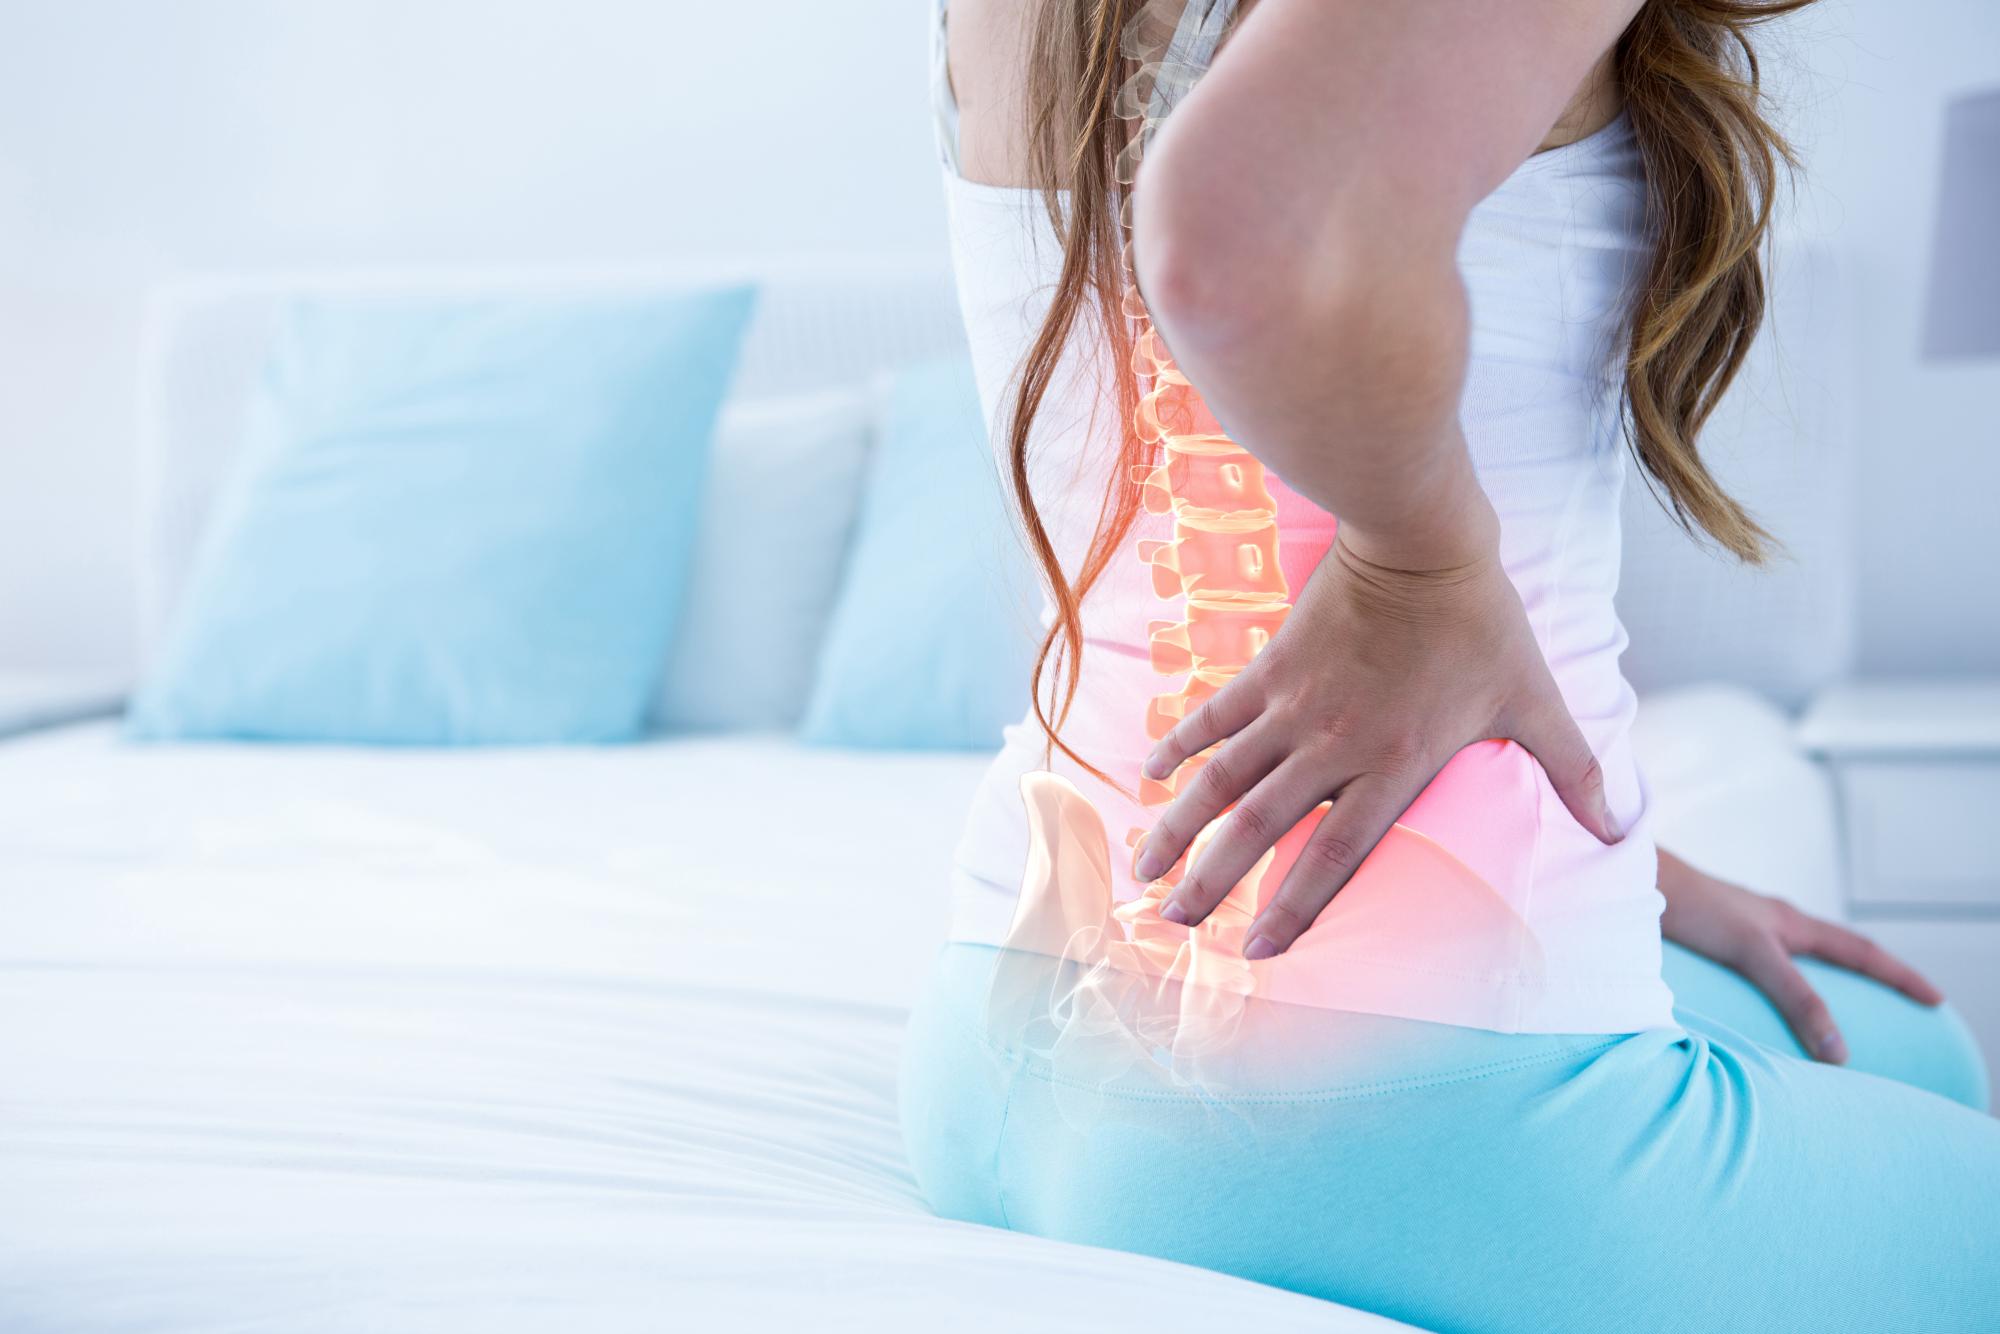 Physical Therapy is commonly the quickest, longest lasting, and most cost effective treatment for low back pain. Understanding you treatment options could get you back to loving life sooner.